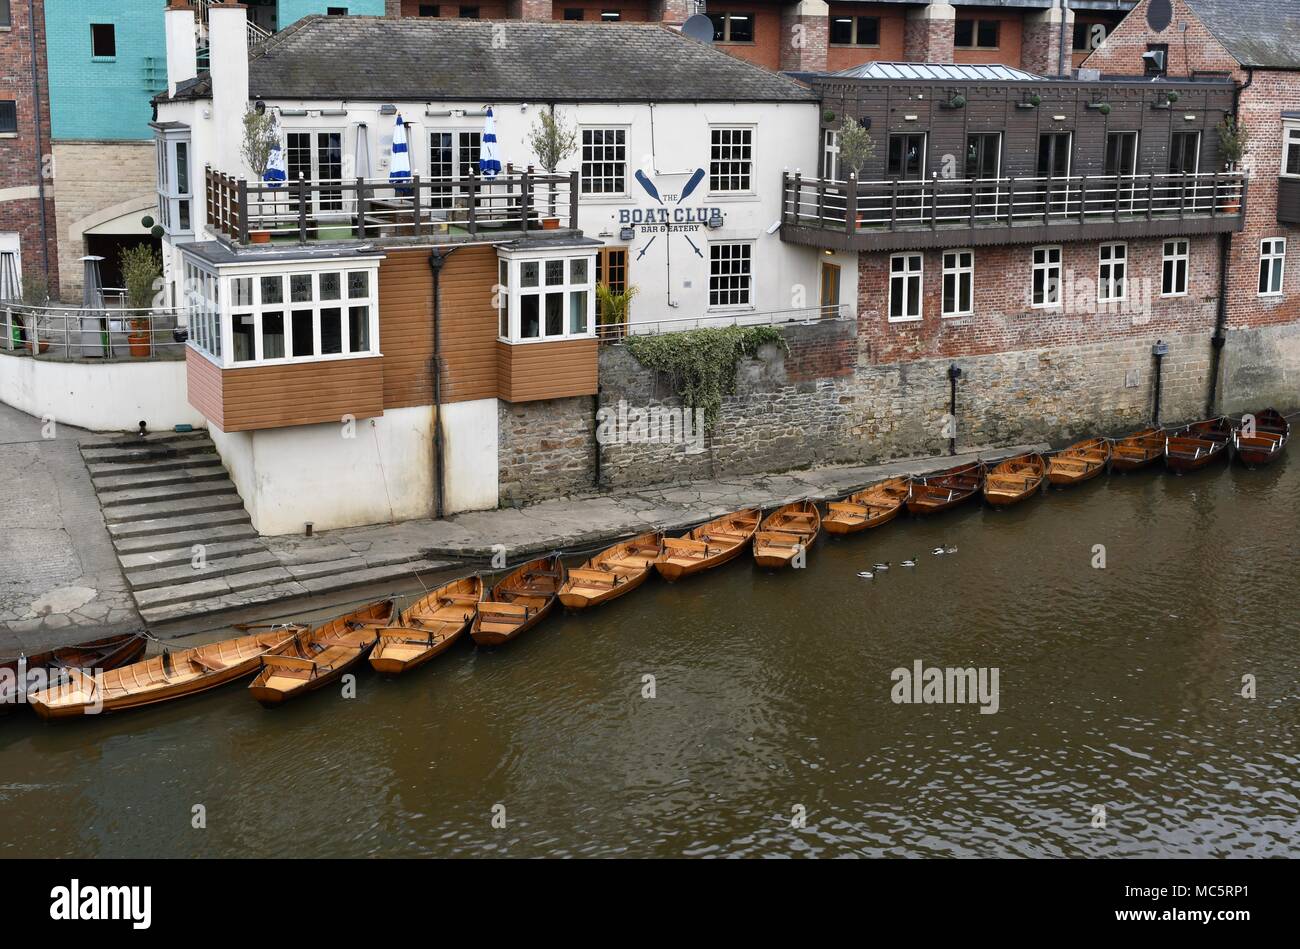 The Boat Club bar and eatery in Durham Stock Photo